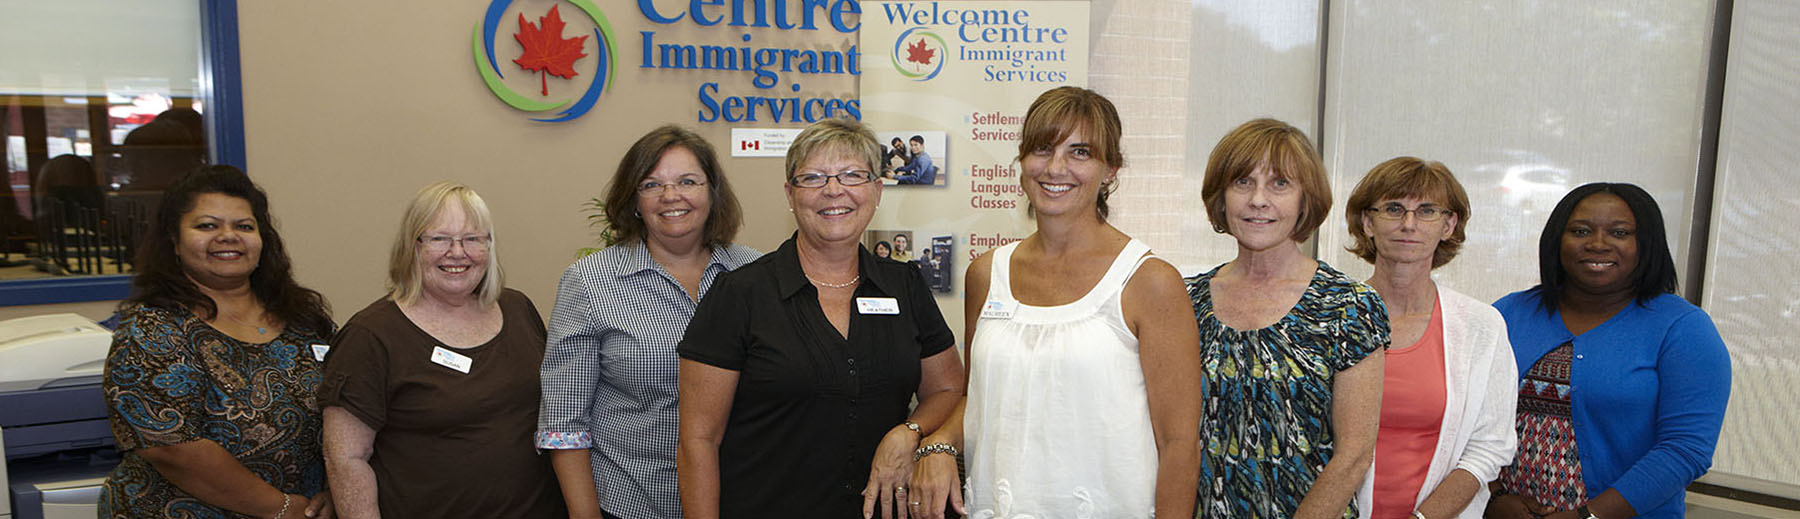 Staff at the Welcome Cente in Pickering